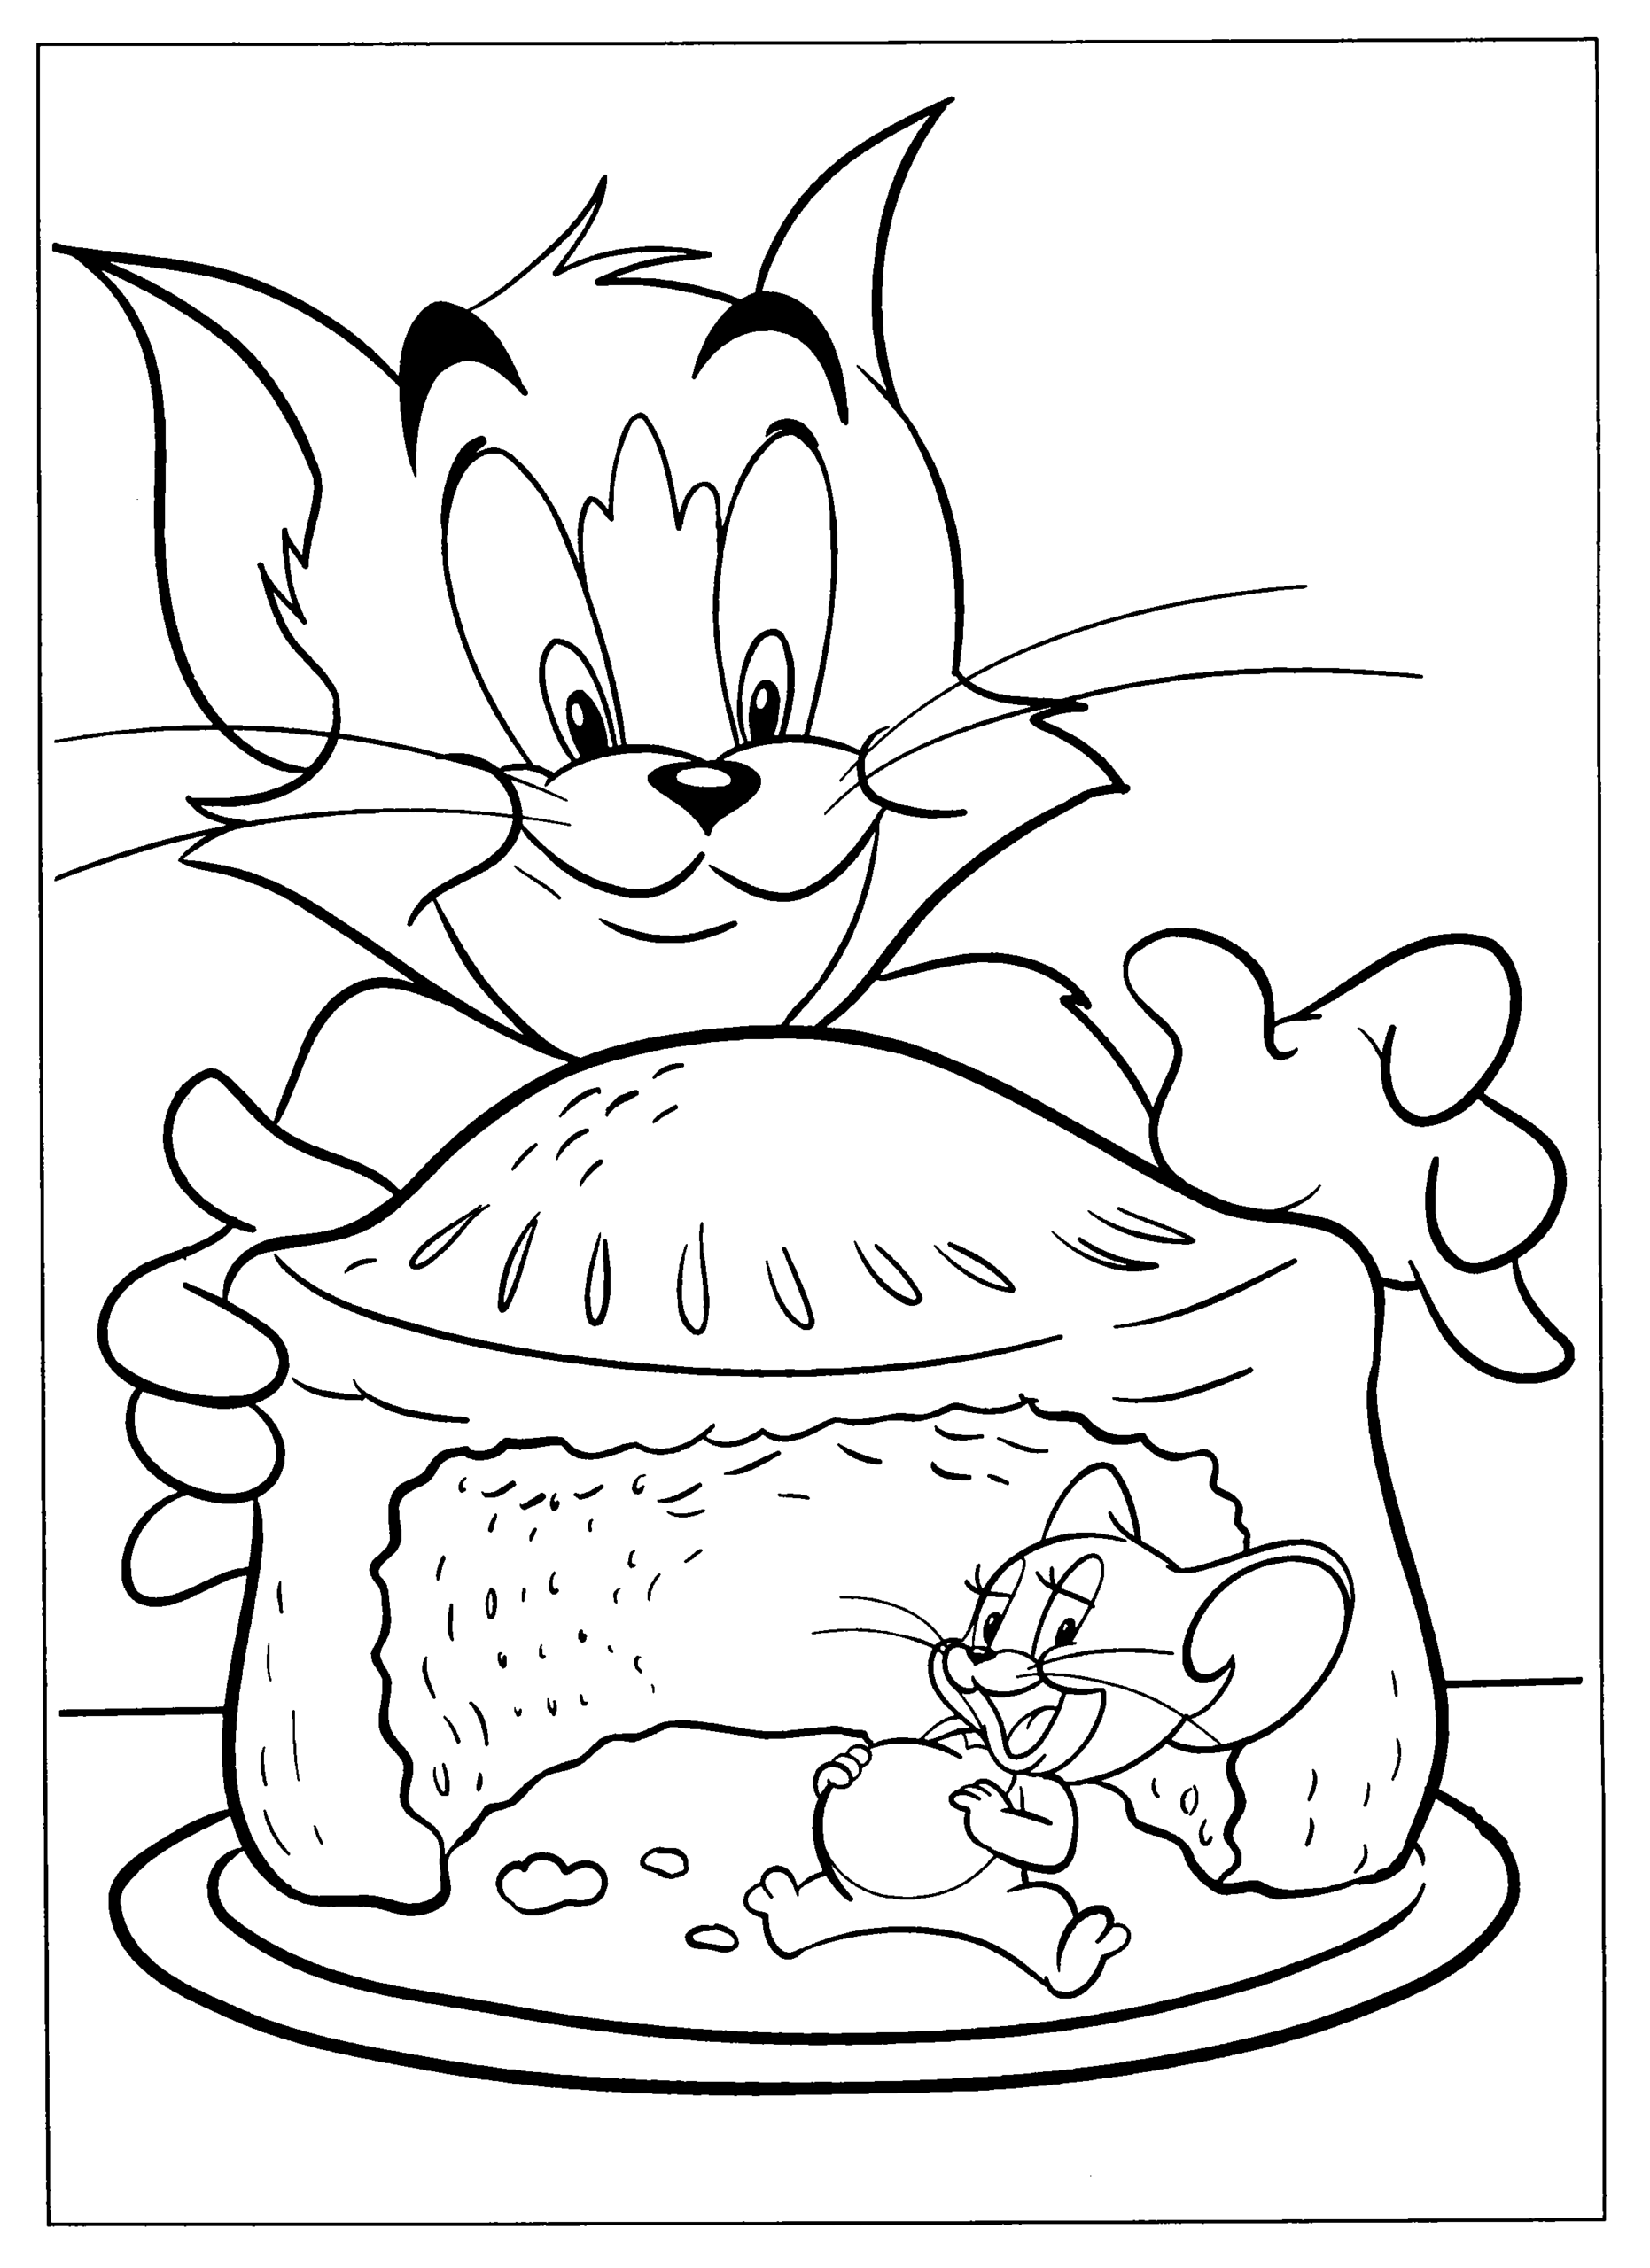 Tom and Jerry Coloring Pages TV Film tom and jerry 14 Printable 2020 10185 Coloring4free